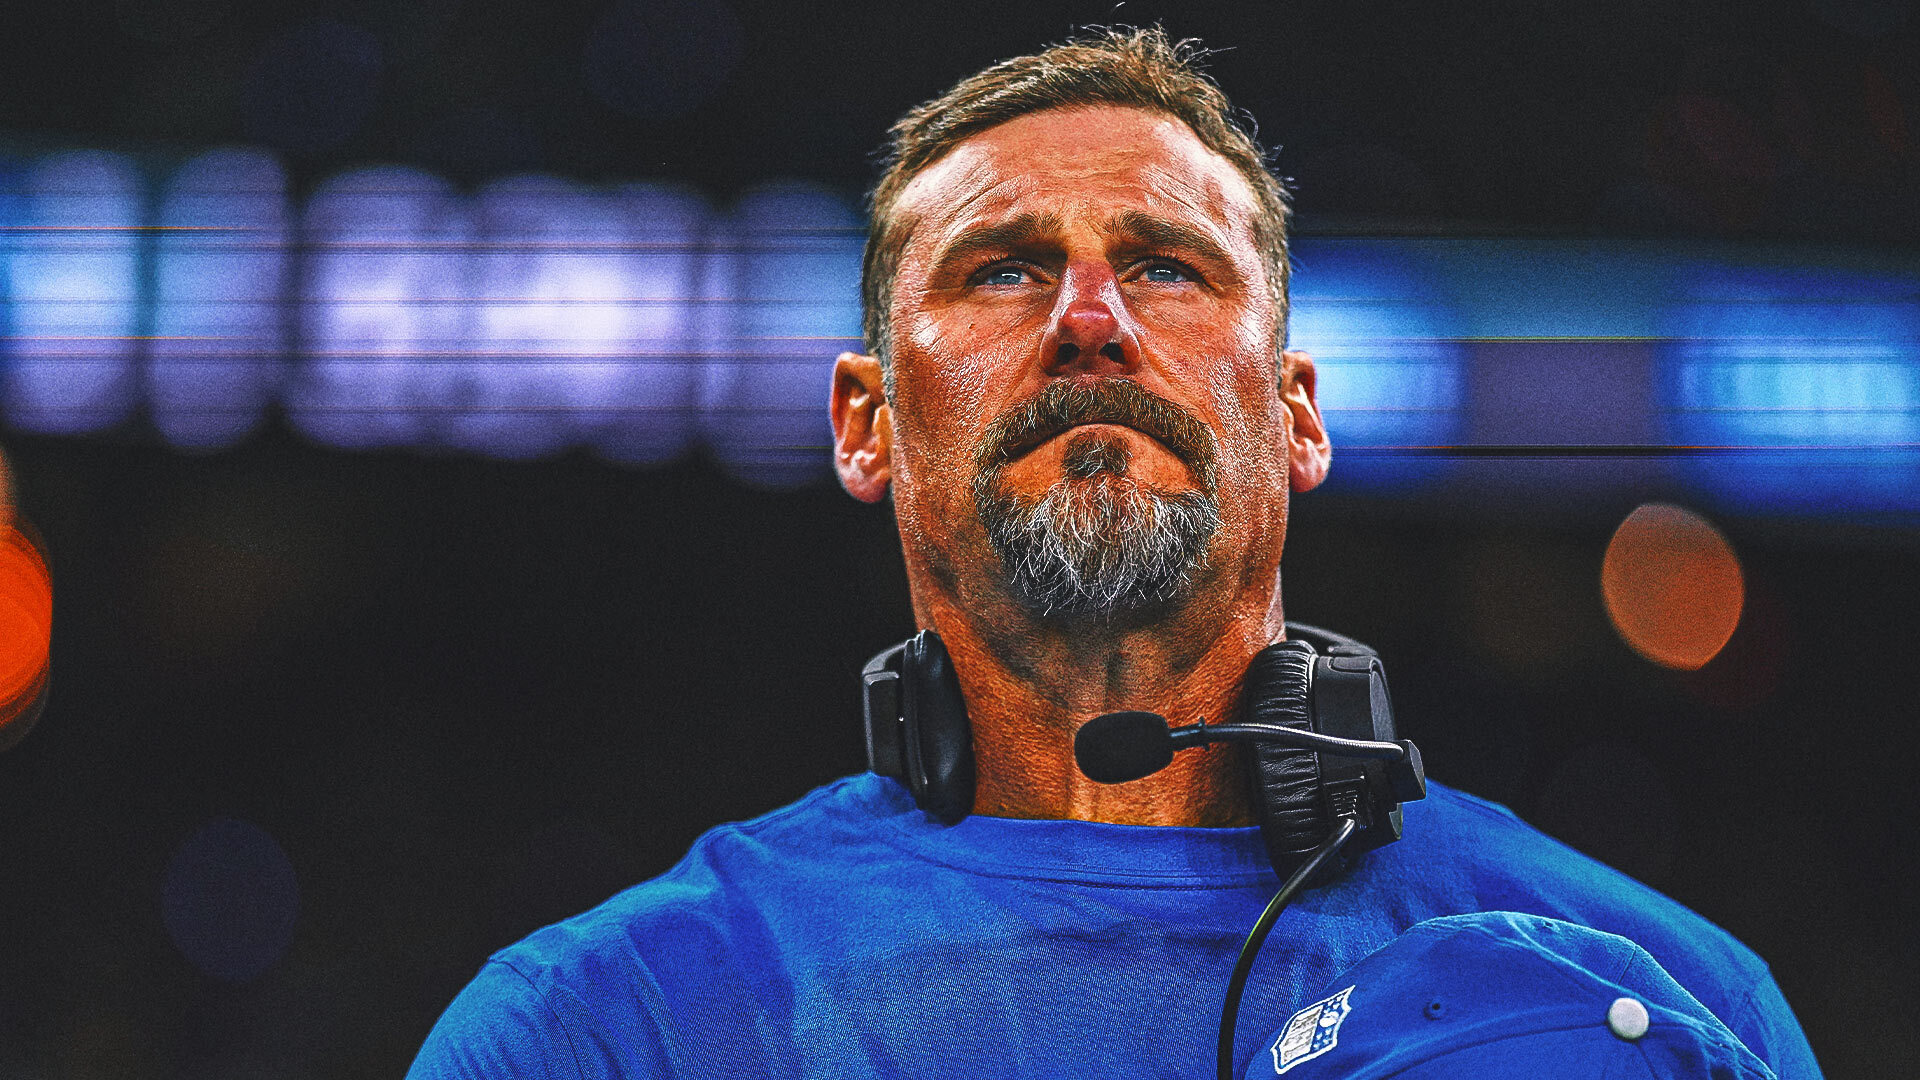 Lions' Dan Campbell wants to 'help' Texas A&M but isn't interested in HC job